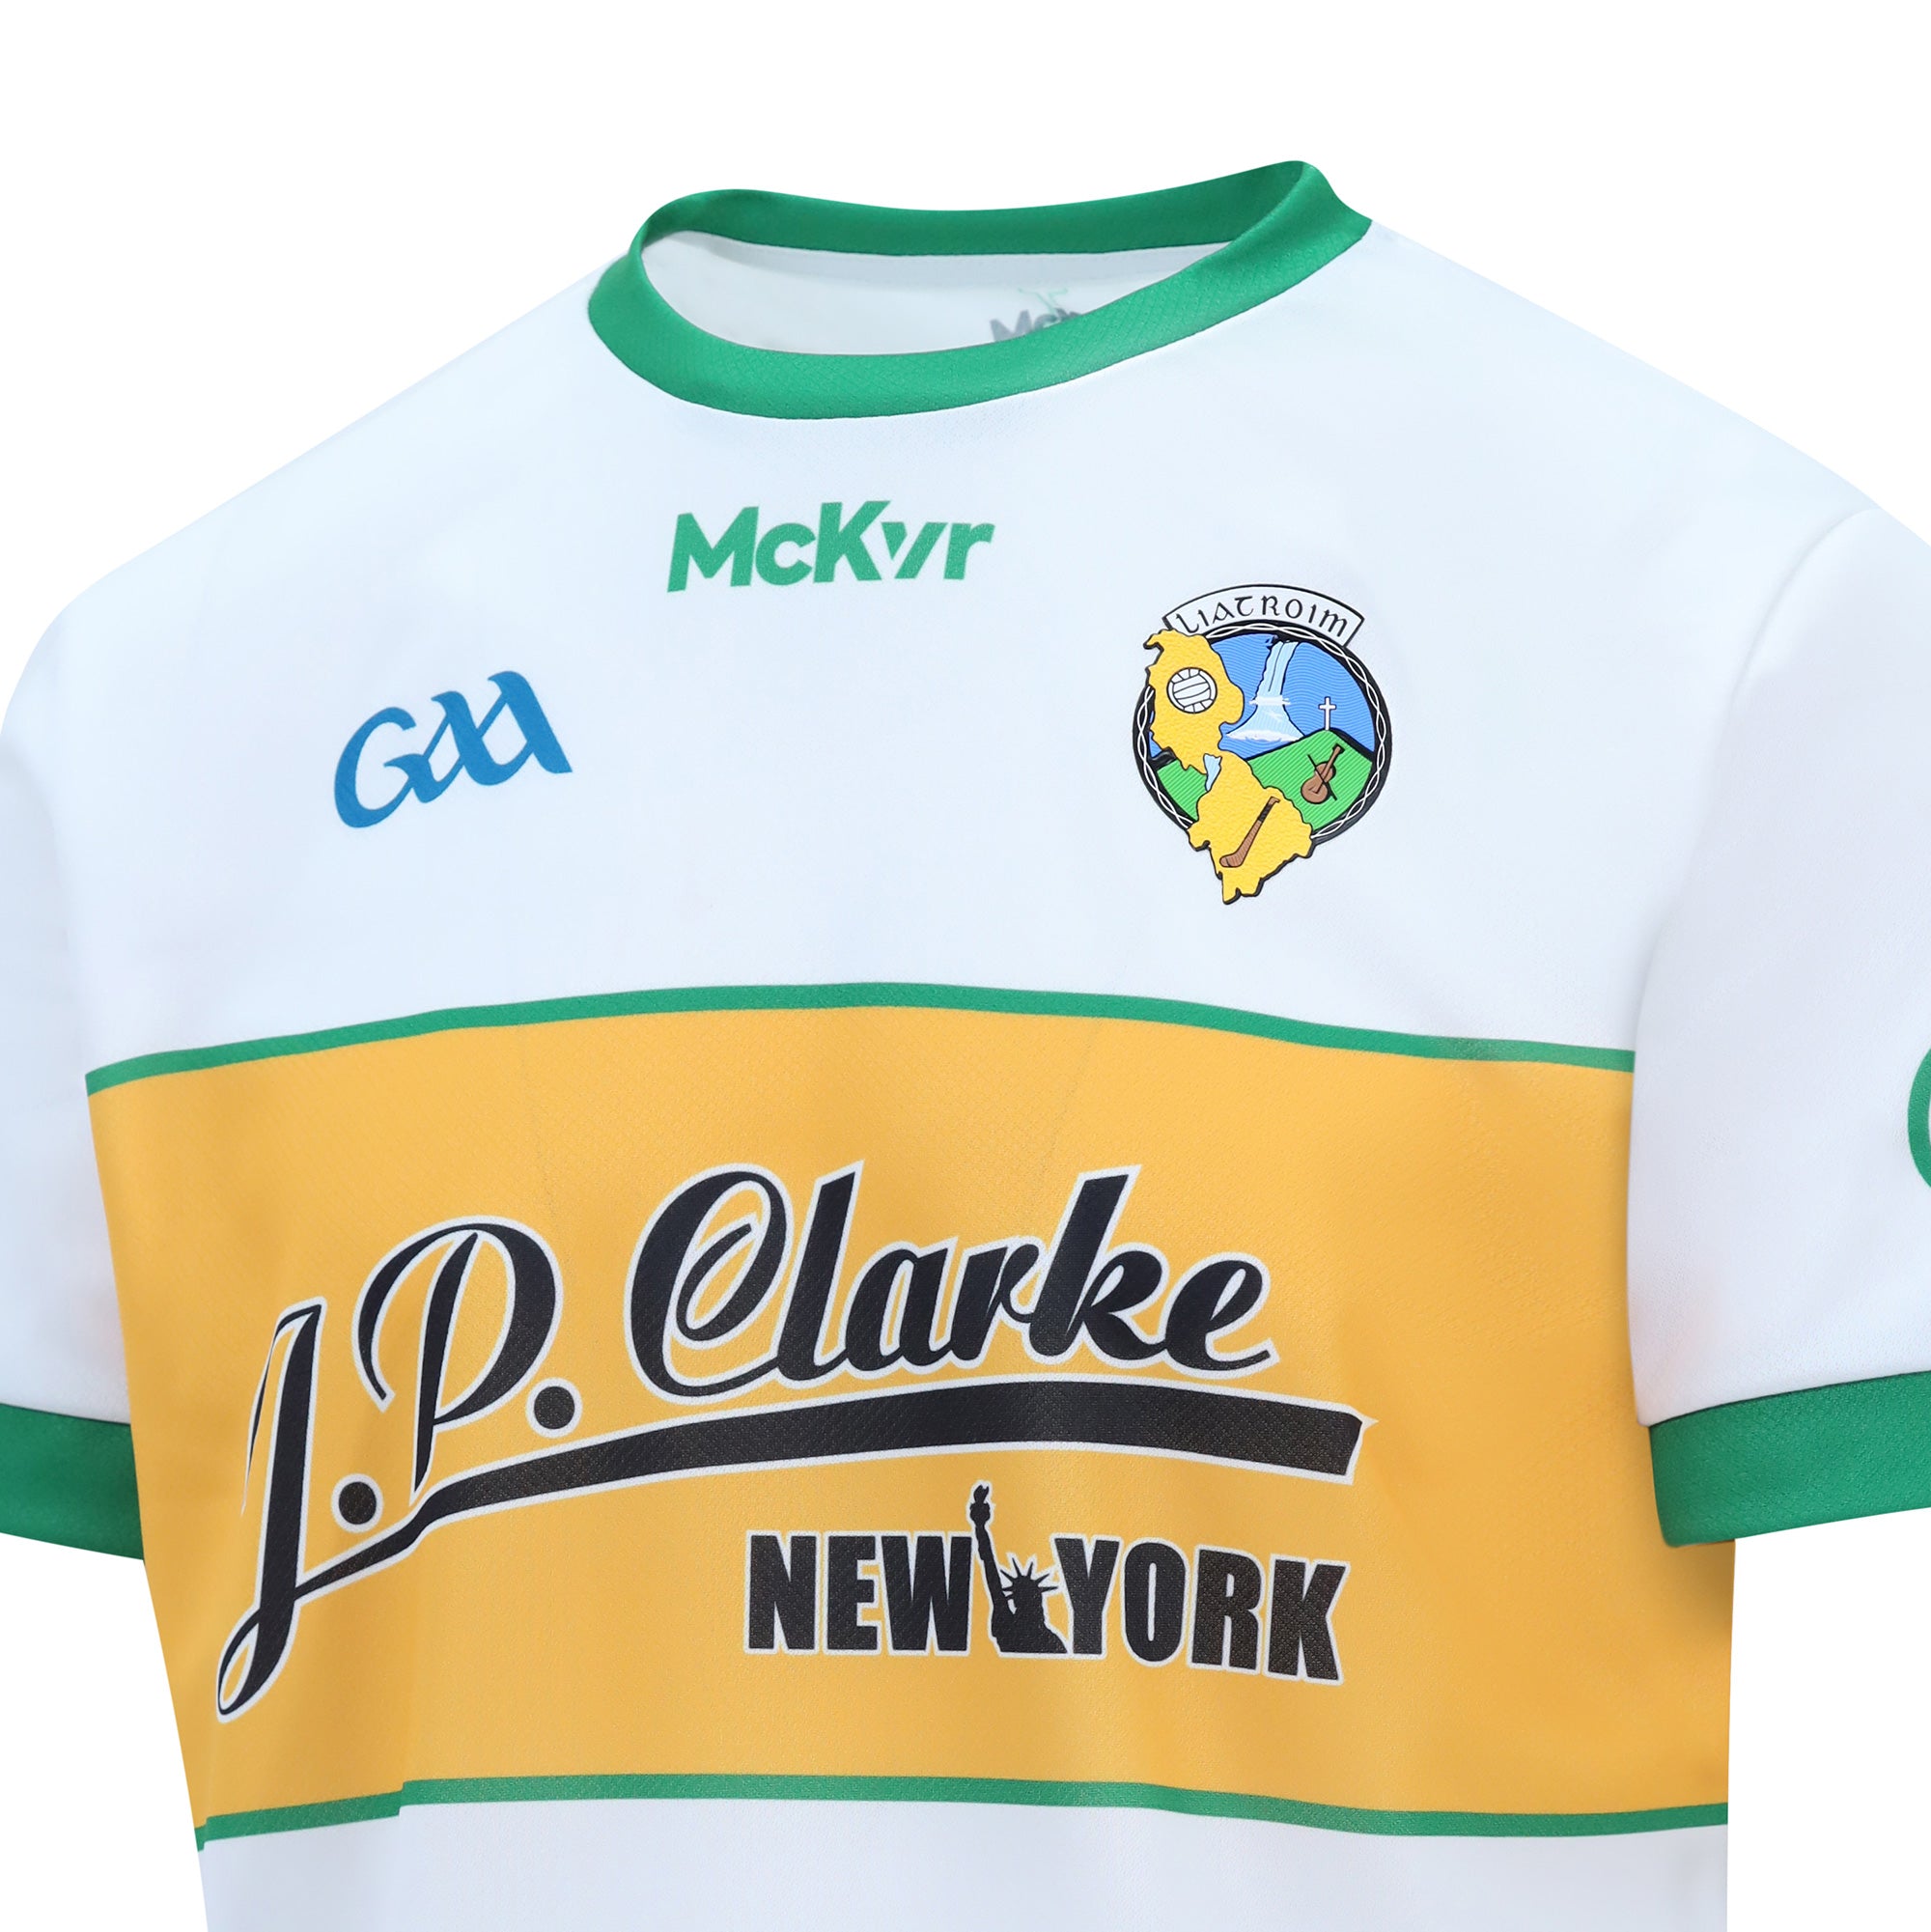 Mc Keever Leitrim GAA Official Goalkeeper Jersey - Adult - White/Green/Gold - Player Fit